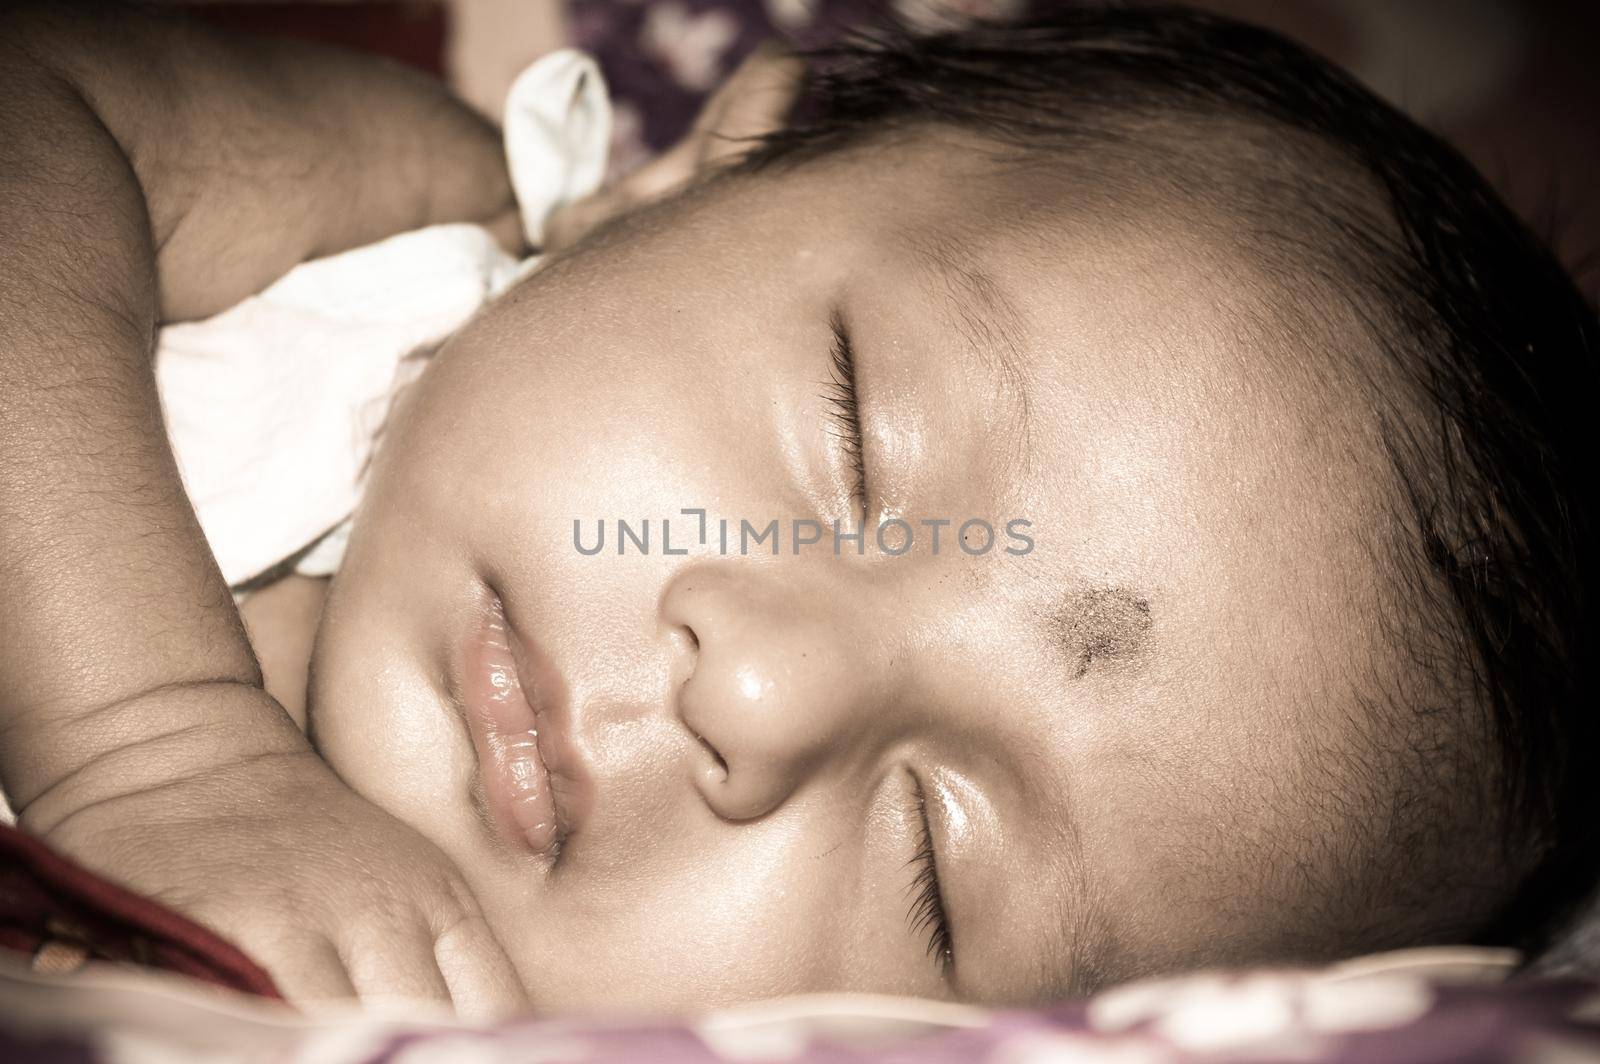 Close up face of a cute sleeping newborn baby. Closeup portrait of a Sweet just born infant boy captured in sleepy mood drowsy eyes. Hand on Chin. Front view. Child care kid background image.